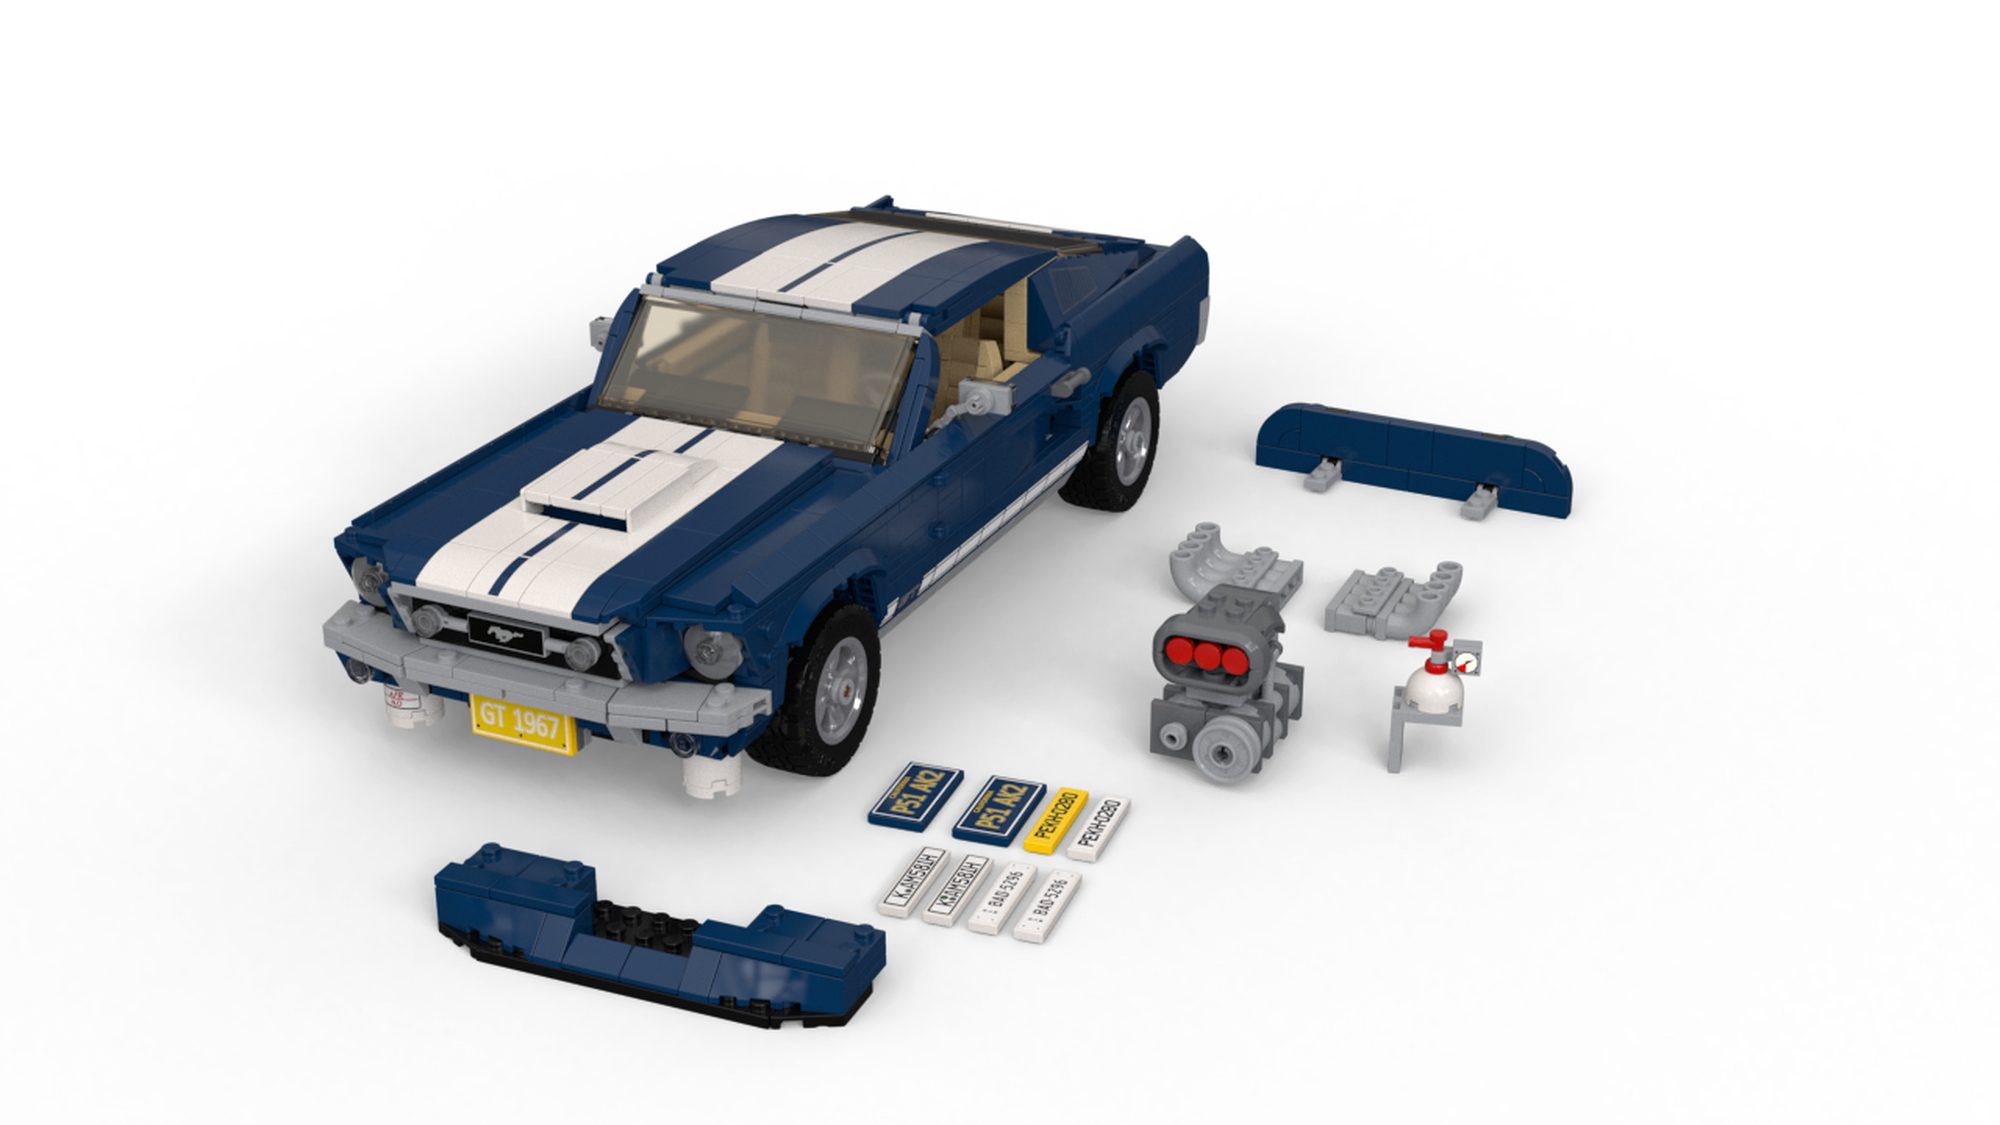 LEGO® Creator - 10265 Ford Mustang